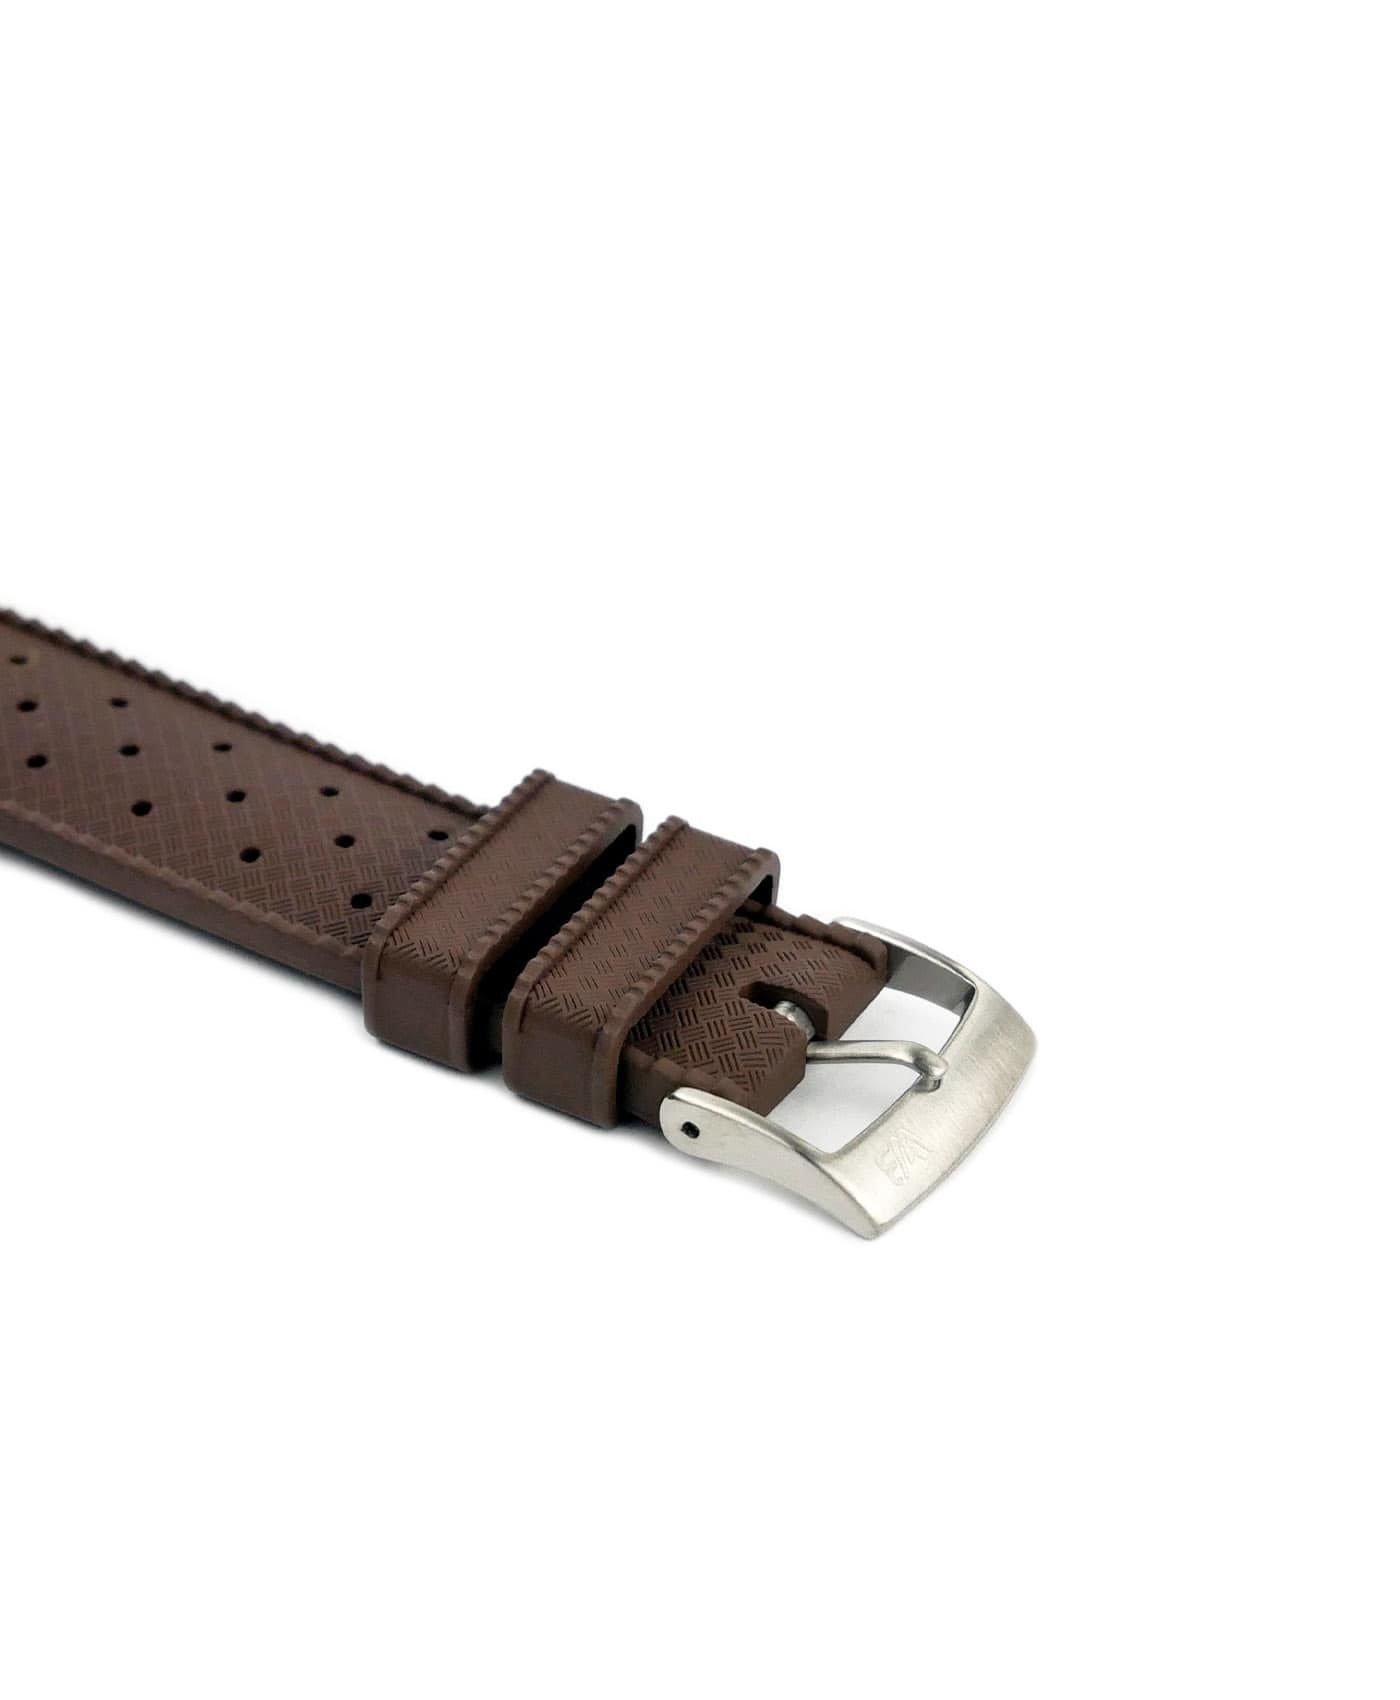 Tropical Rubber watch strap_Brown_Buckle